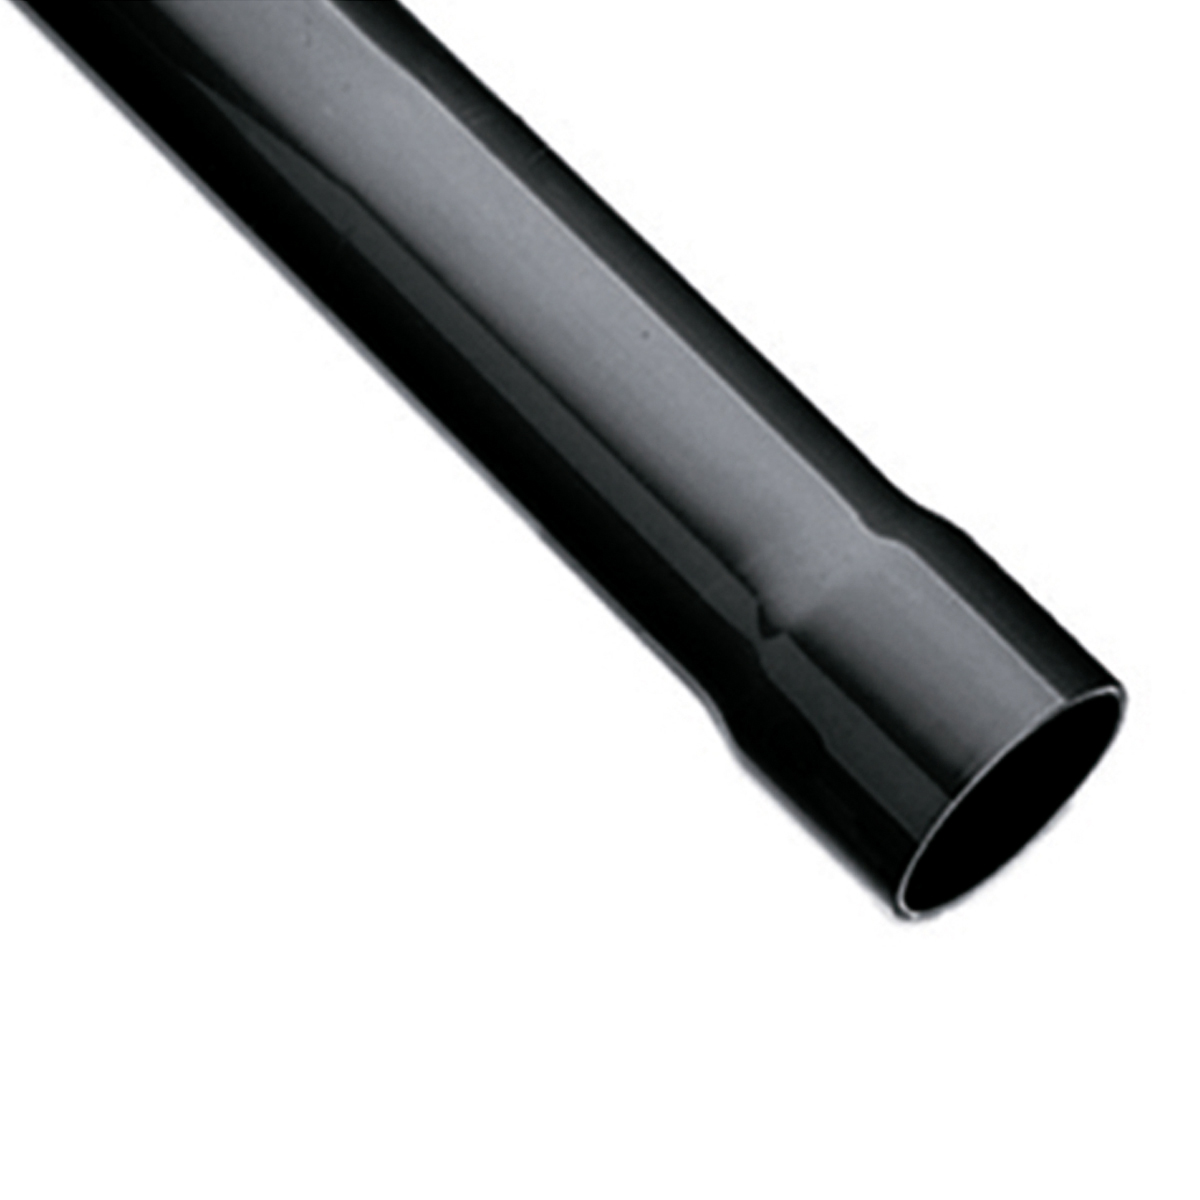 IBG® PVC-u pipe special types, grey without socket, 2m, PN10 d50×2,4 IBG® PVC-u pipe special types, grey without socket, 2m, PN10 d50×2,4